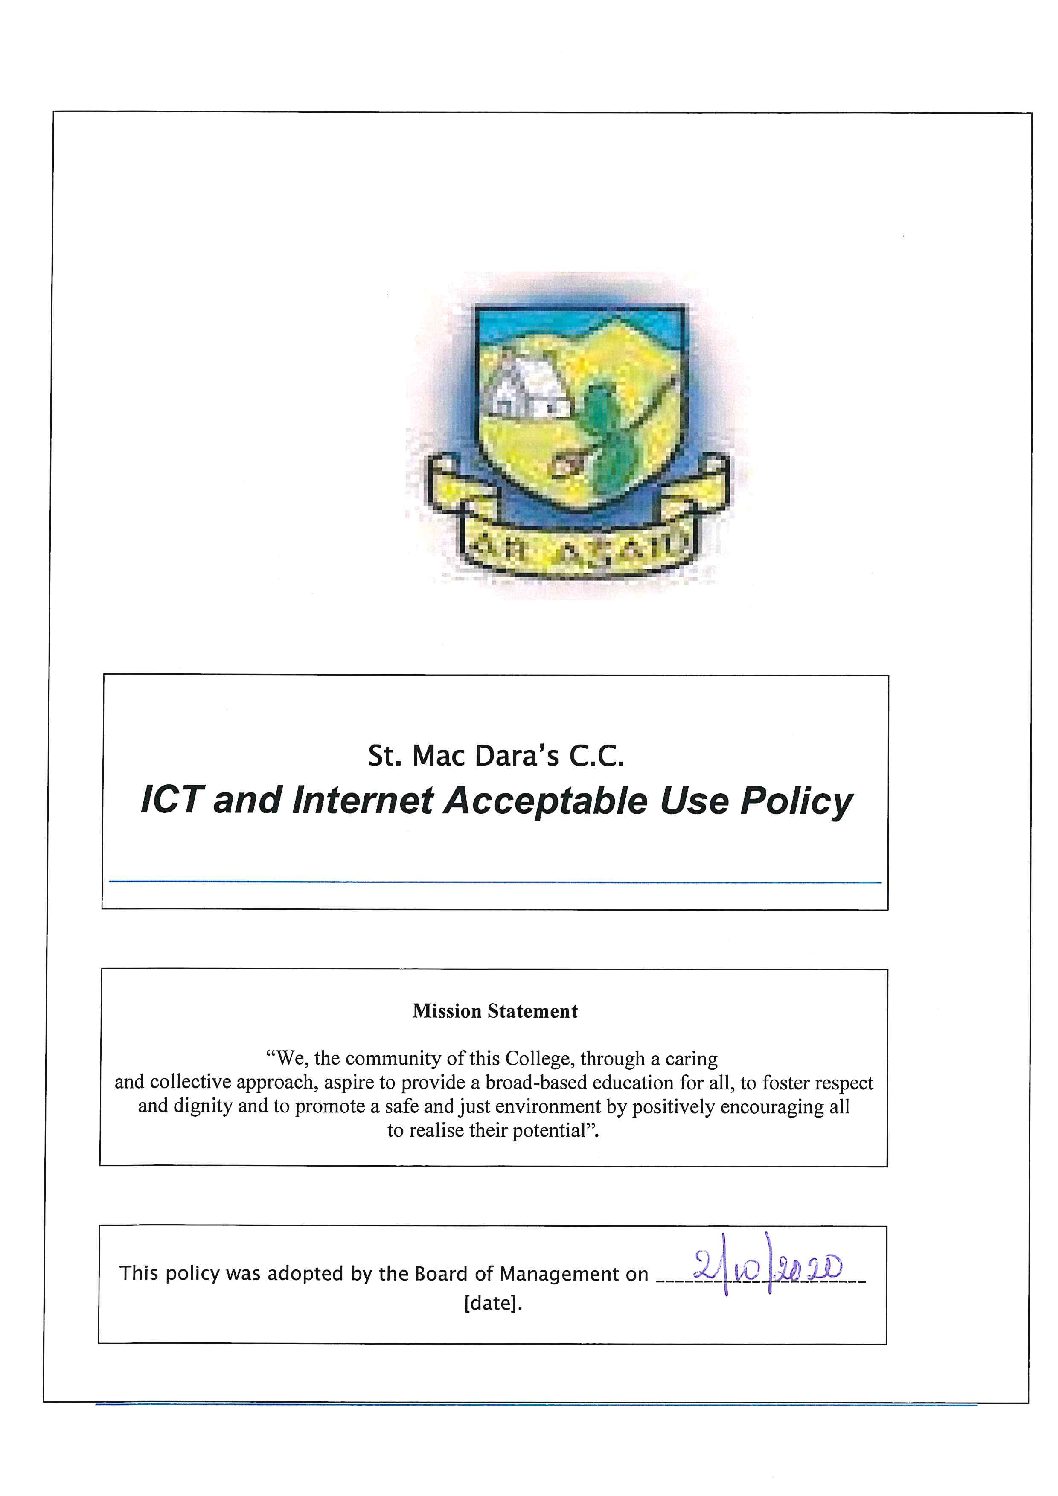 ICT and Internet Acceptable Use Policy